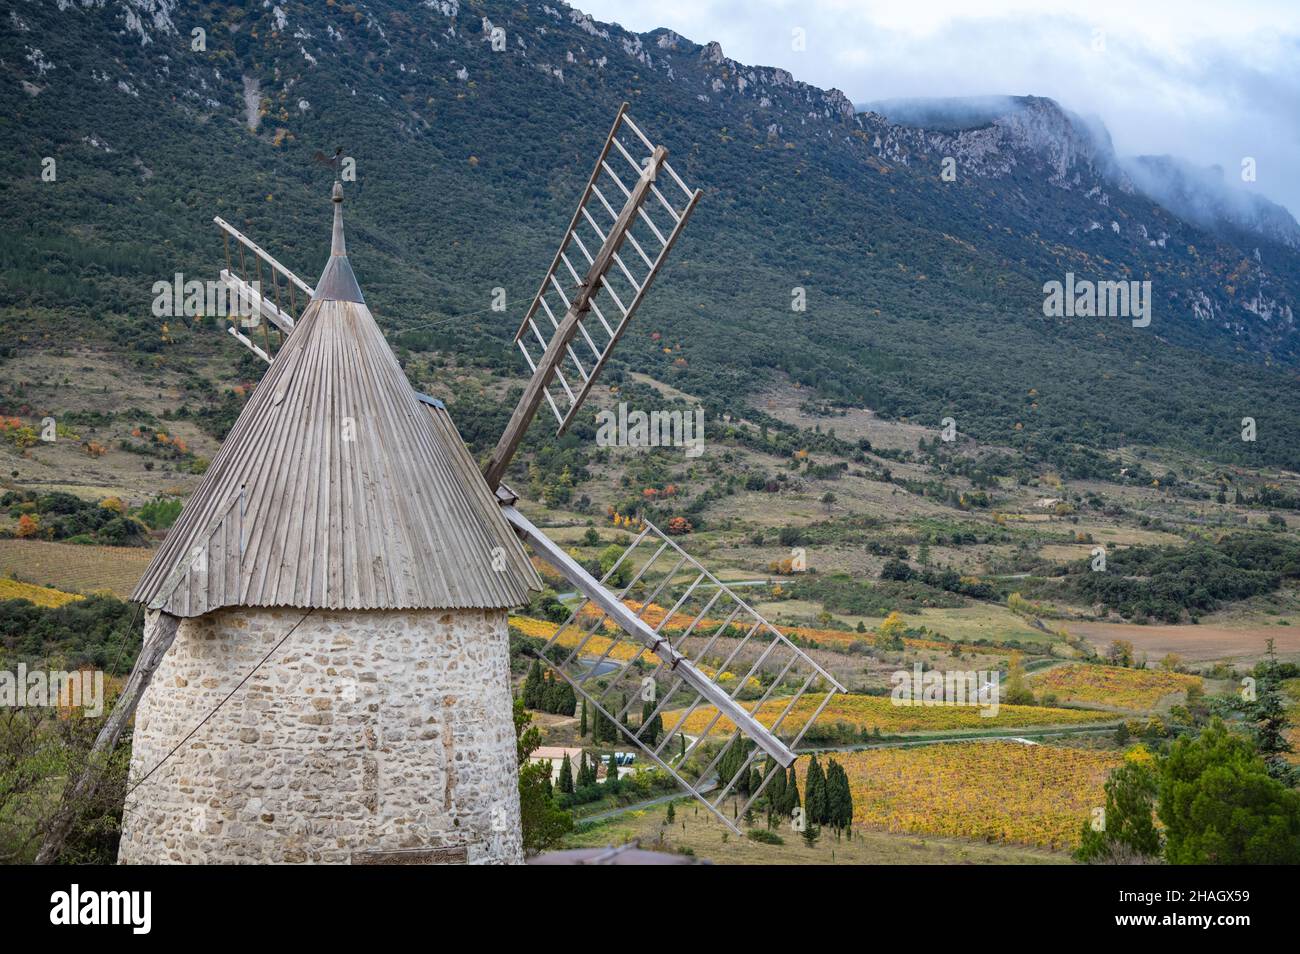 Picturesque view of Cucugnan commune with main landmark 17th-century windmill, Aude department, southern France Stock Photo